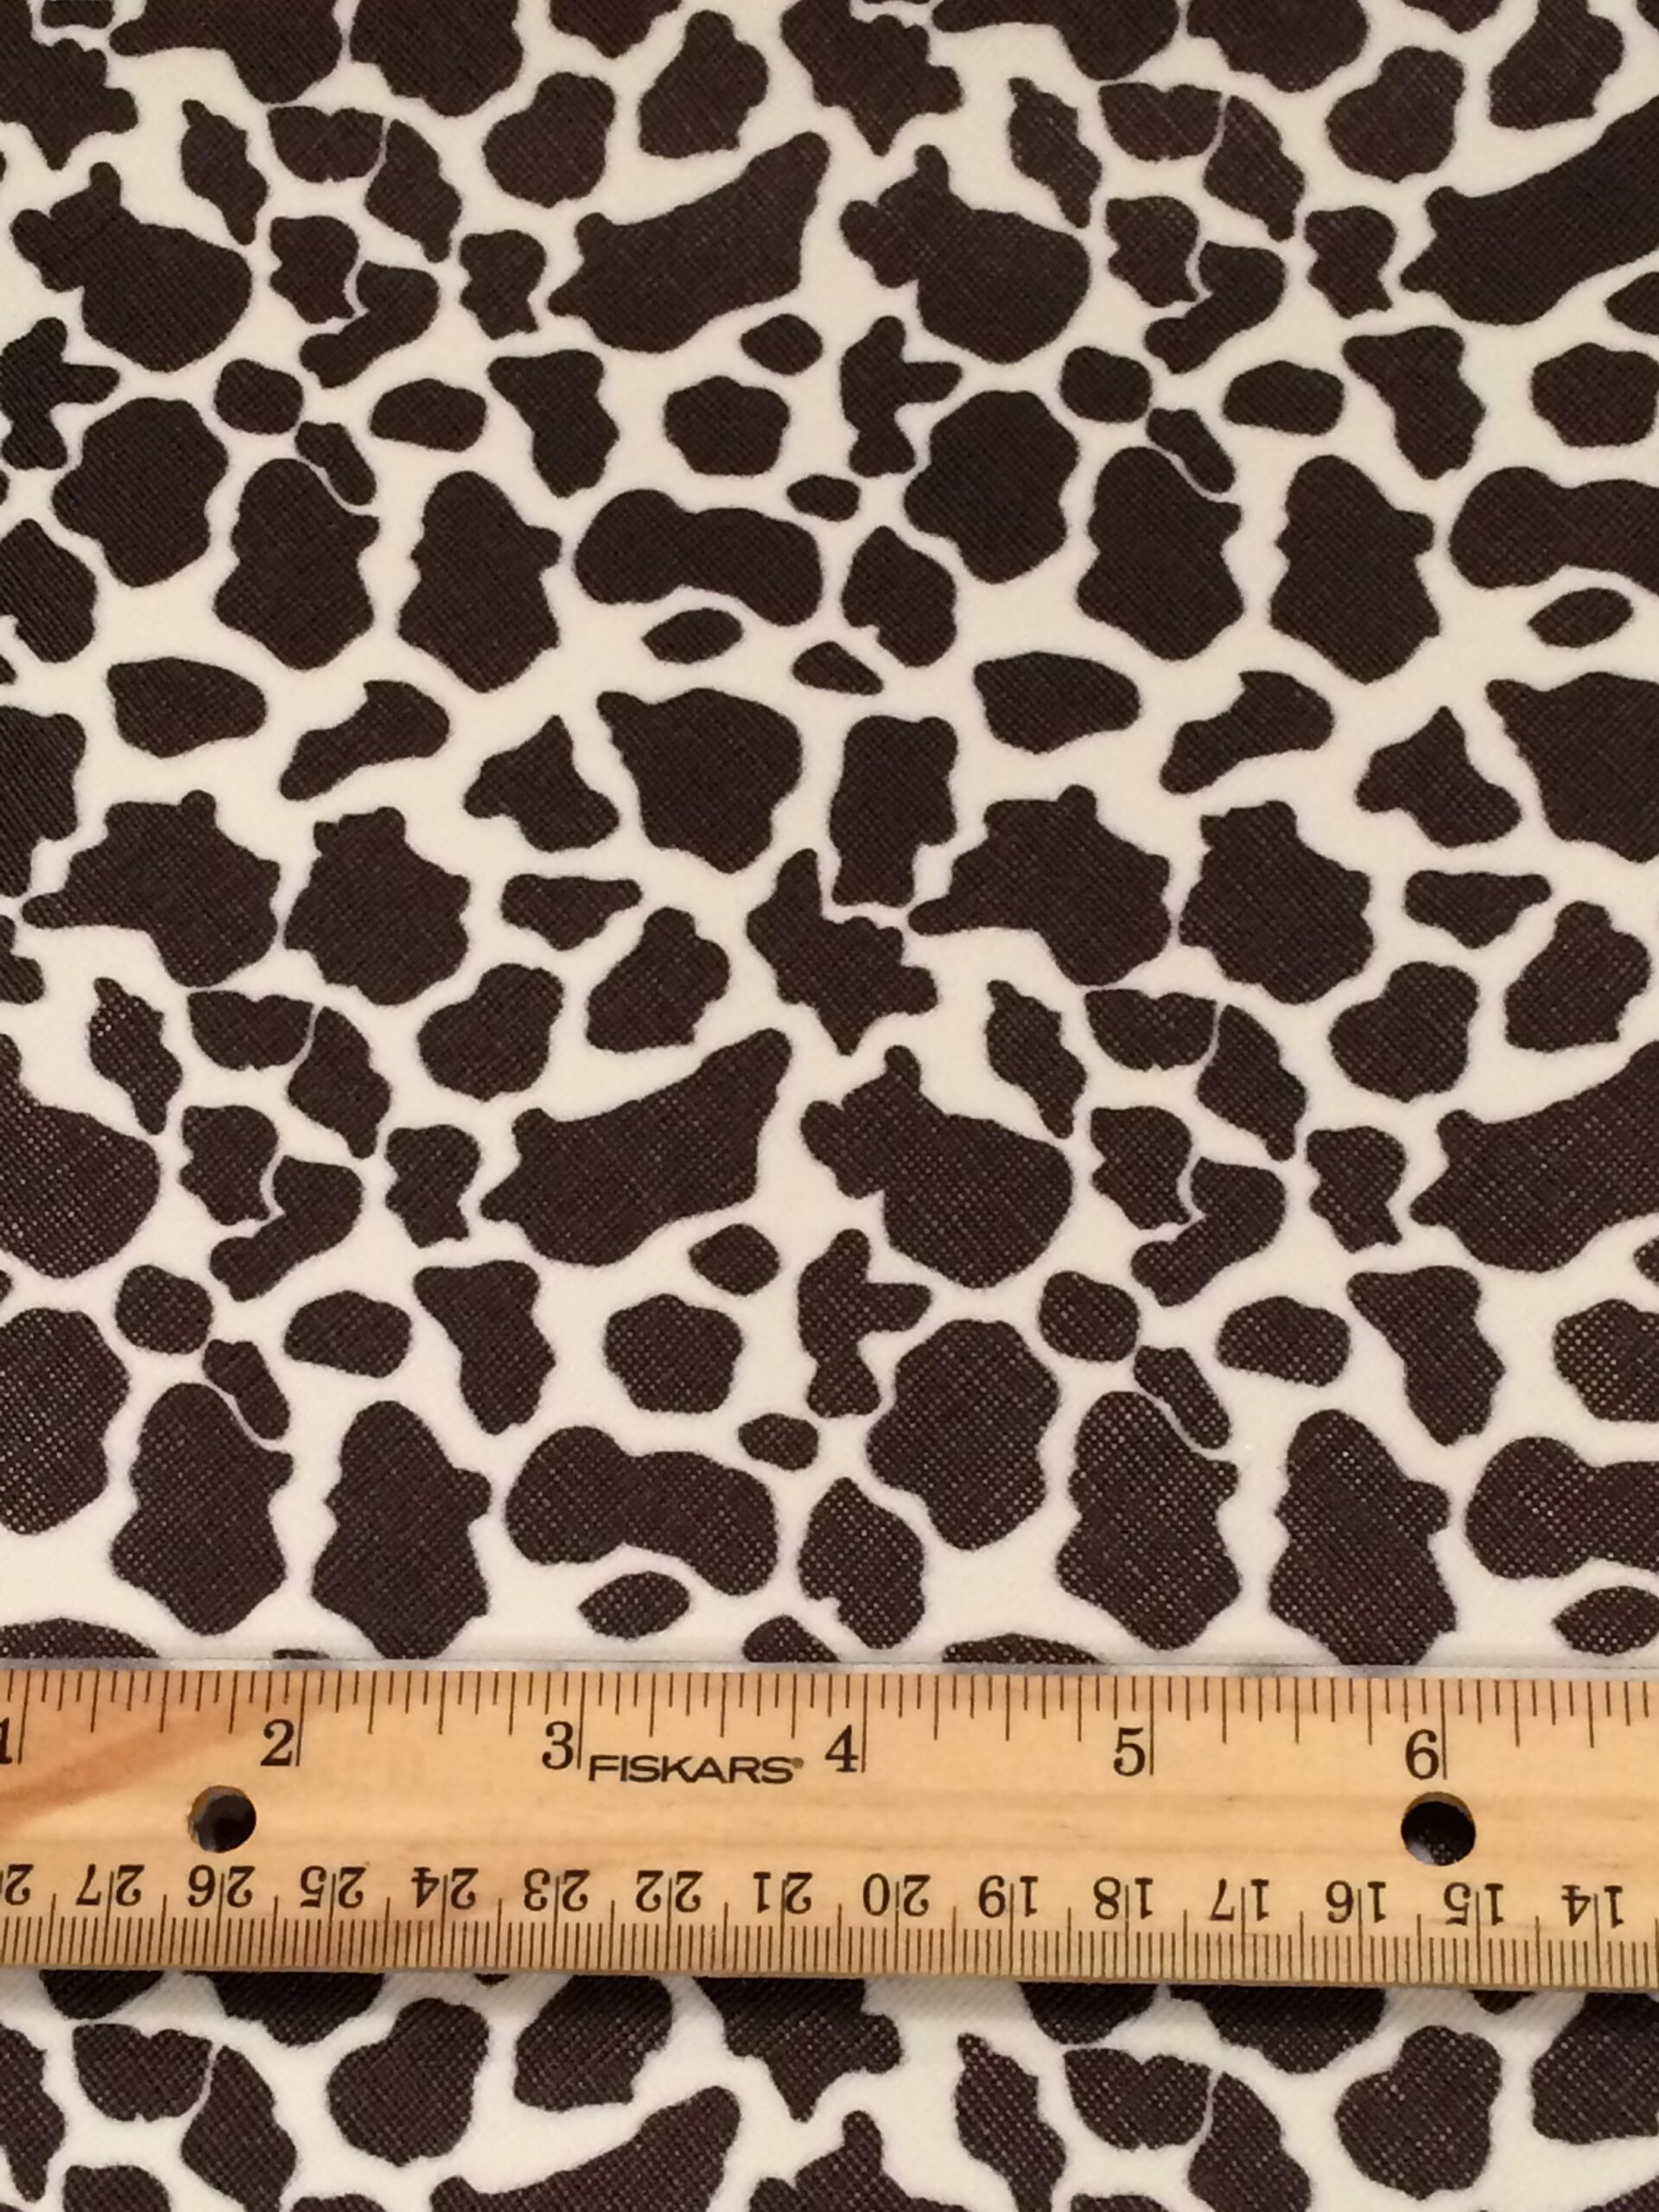 Cow Print faux leather printed vinyl roll 11×52 – The Crazy Craft Lady